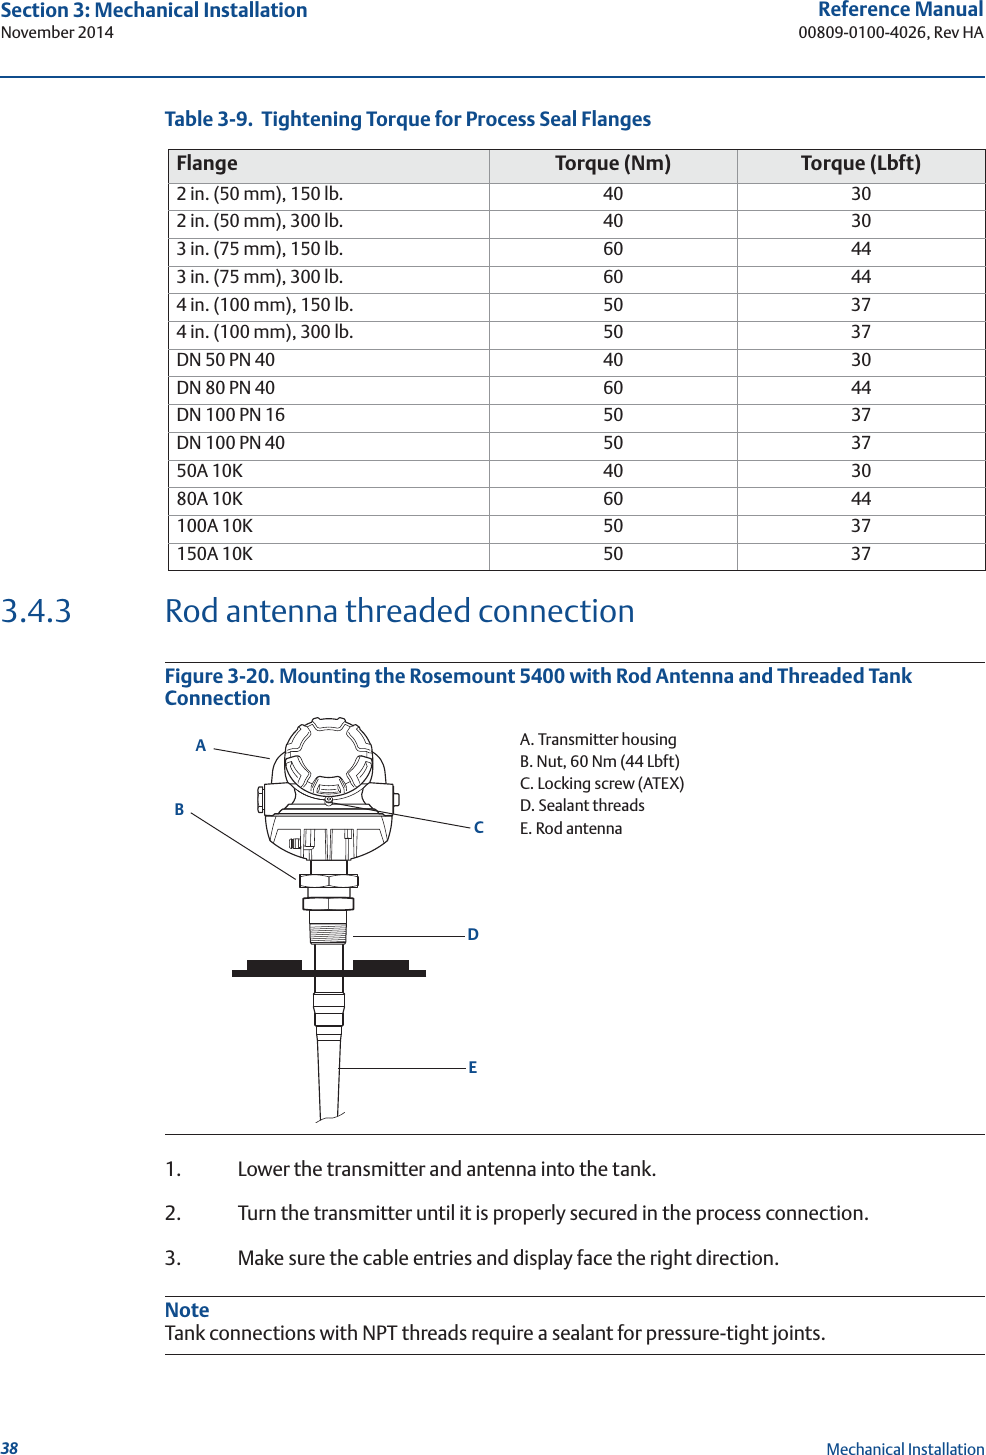 38Reference Manual00809-0100-4026, Rev HASection 3: Mechanical InstallationNovember 2014Mechanical InstallationTable 3-9.  Tightening Torque for Process Seal Flanges3.4.3 Rod antenna threaded connectionFigure 3-20. Mounting the Rosemount 5400 with Rod Antenna and Threaded Tank Connection1. Lower the transmitter and antenna into the tank.2. Turn the transmitter until it is properly secured in the process connection. 3. Make sure the cable entries and display face the right direction.NoteTank connections with NPT threads require a sealant for pressure-tight joints.Flange Torque (Nm) Torque (Lbft)2 in. (50 mm), 150 lb. 40 302 in. (50 mm), 300 lb. 40 303 in. (75 mm), 150 lb. 60 443 in. (75 mm), 300 lb. 60 444 in. (100 mm), 150 lb. 50 374 in. (100 mm), 300 lb. 50 37DN 50 PN 40 40 30DN 80 PN 40 60 44DN 100 PN 16 50 37DN 100 PN 40 50 3750A 10K 40 3080A 10K 60 44100A 10K 50 37150A 10K 50 37A. Transmitter housingB. Nut, 60 Nm (44 Lbft)C. Locking screw (ATEX)D. Sealant threadsE. Rod antennaEDCAB